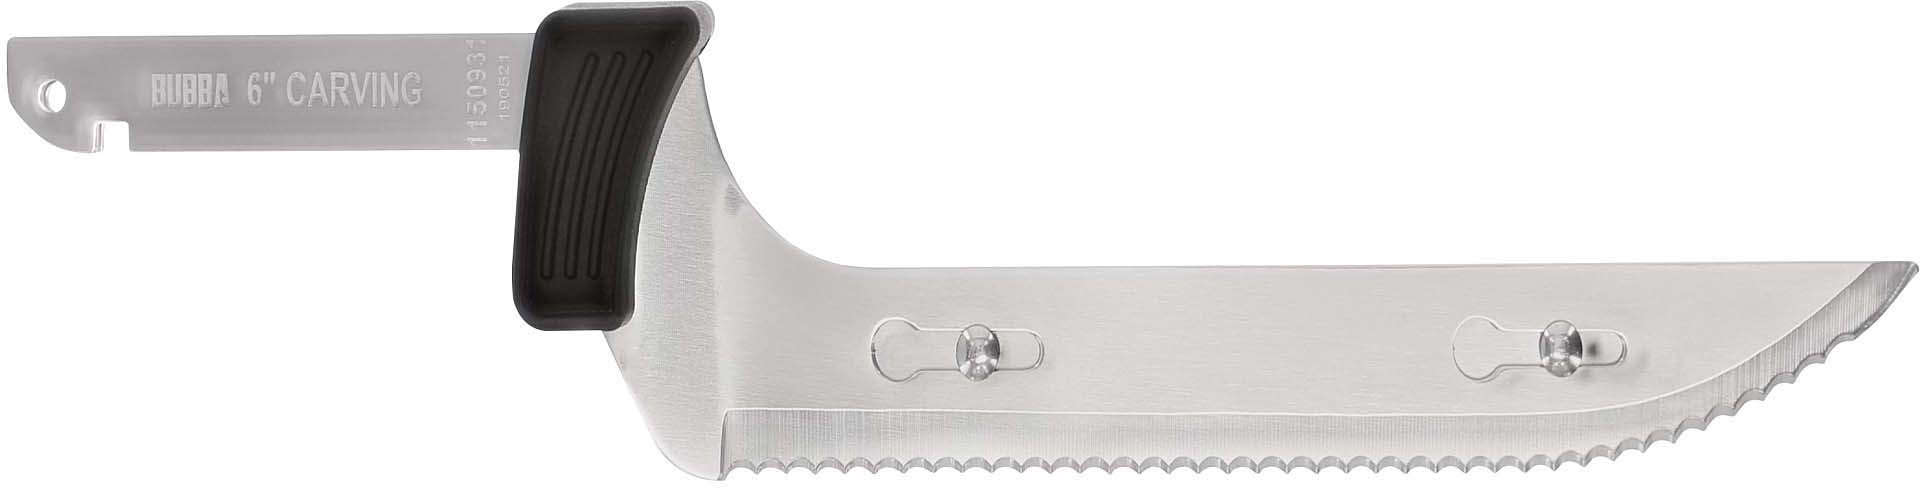 Bubba Blade Lithium-Ion Rechargeable Fillet Knife - Cordless